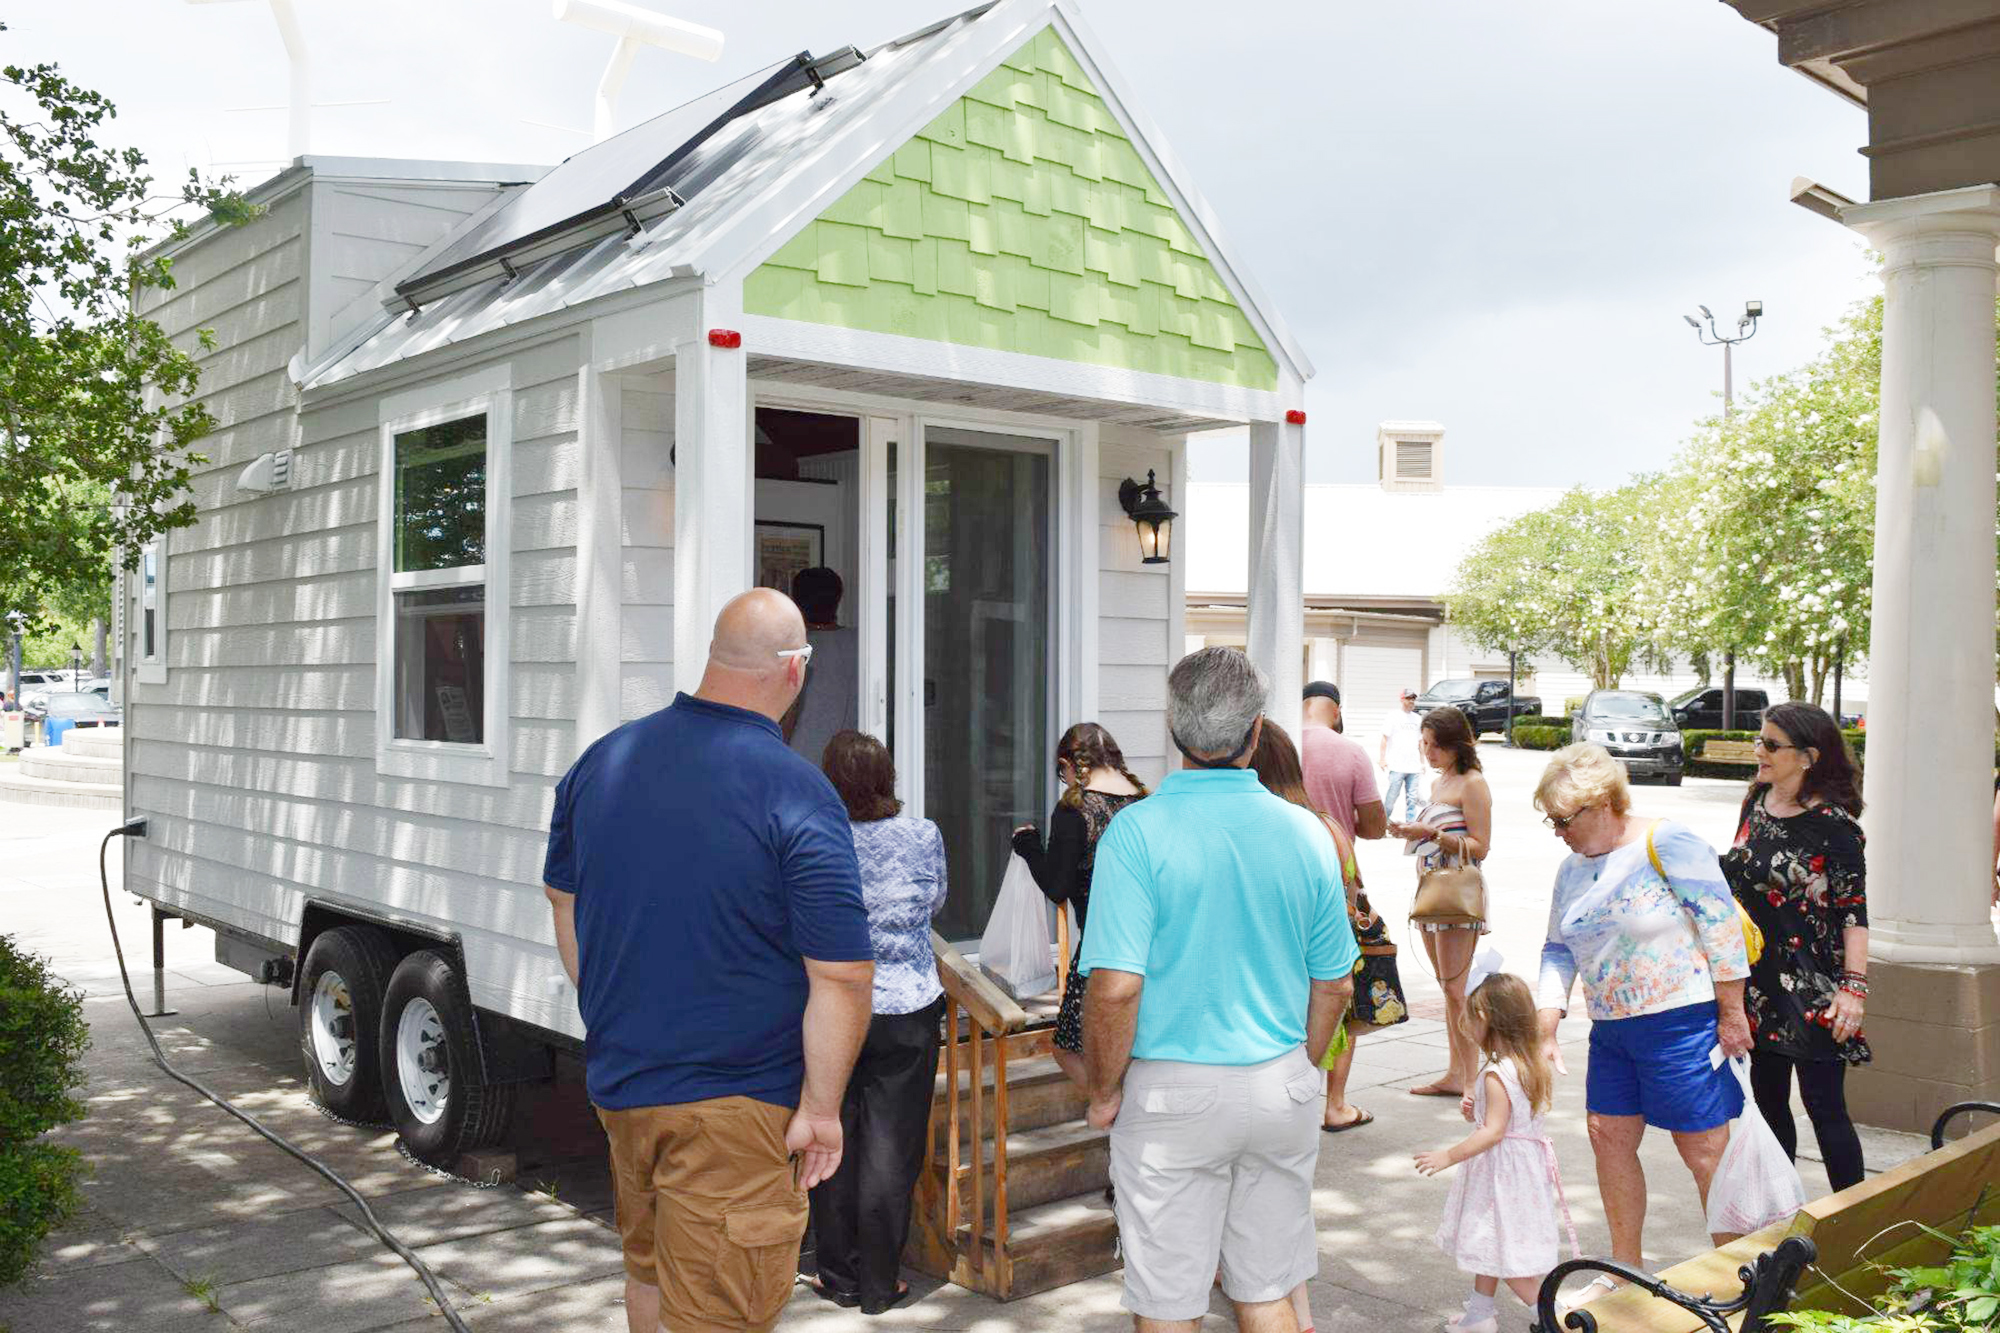 Eco Relics, which is taking part in the project, built a tiny house with recycled and reclaimed materials as a demonstration.